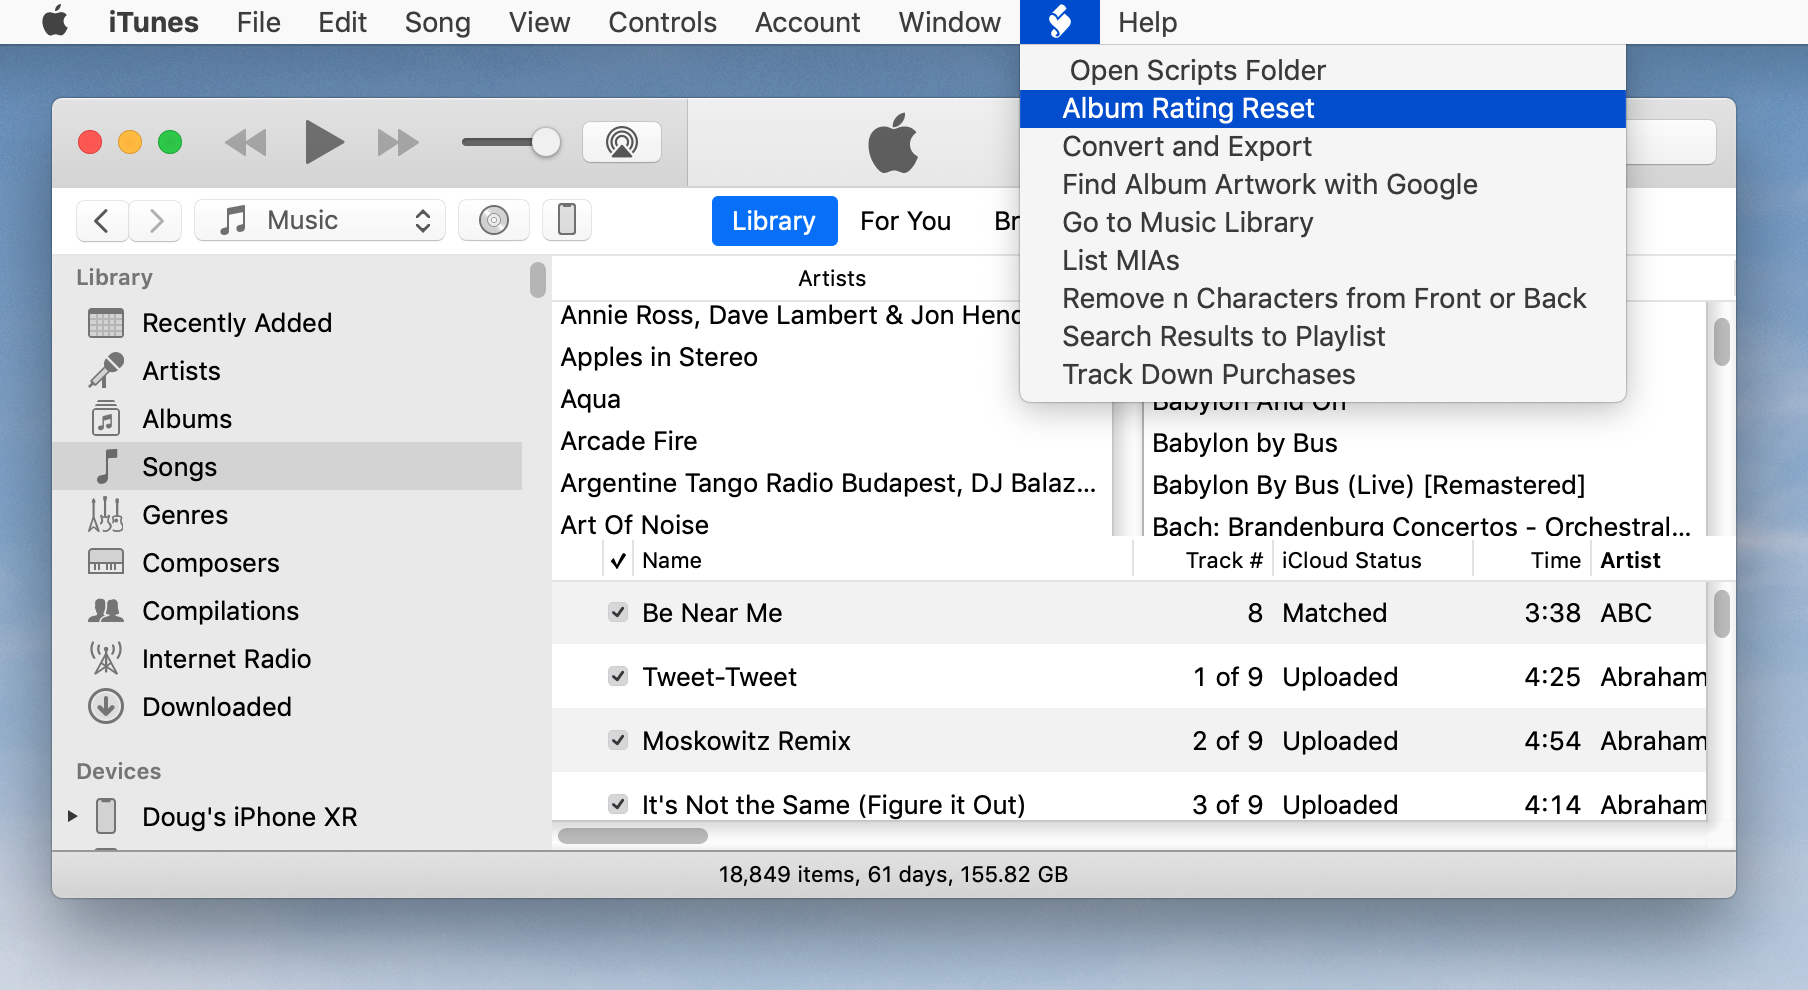 itunes for mac os x lion 10.7.5